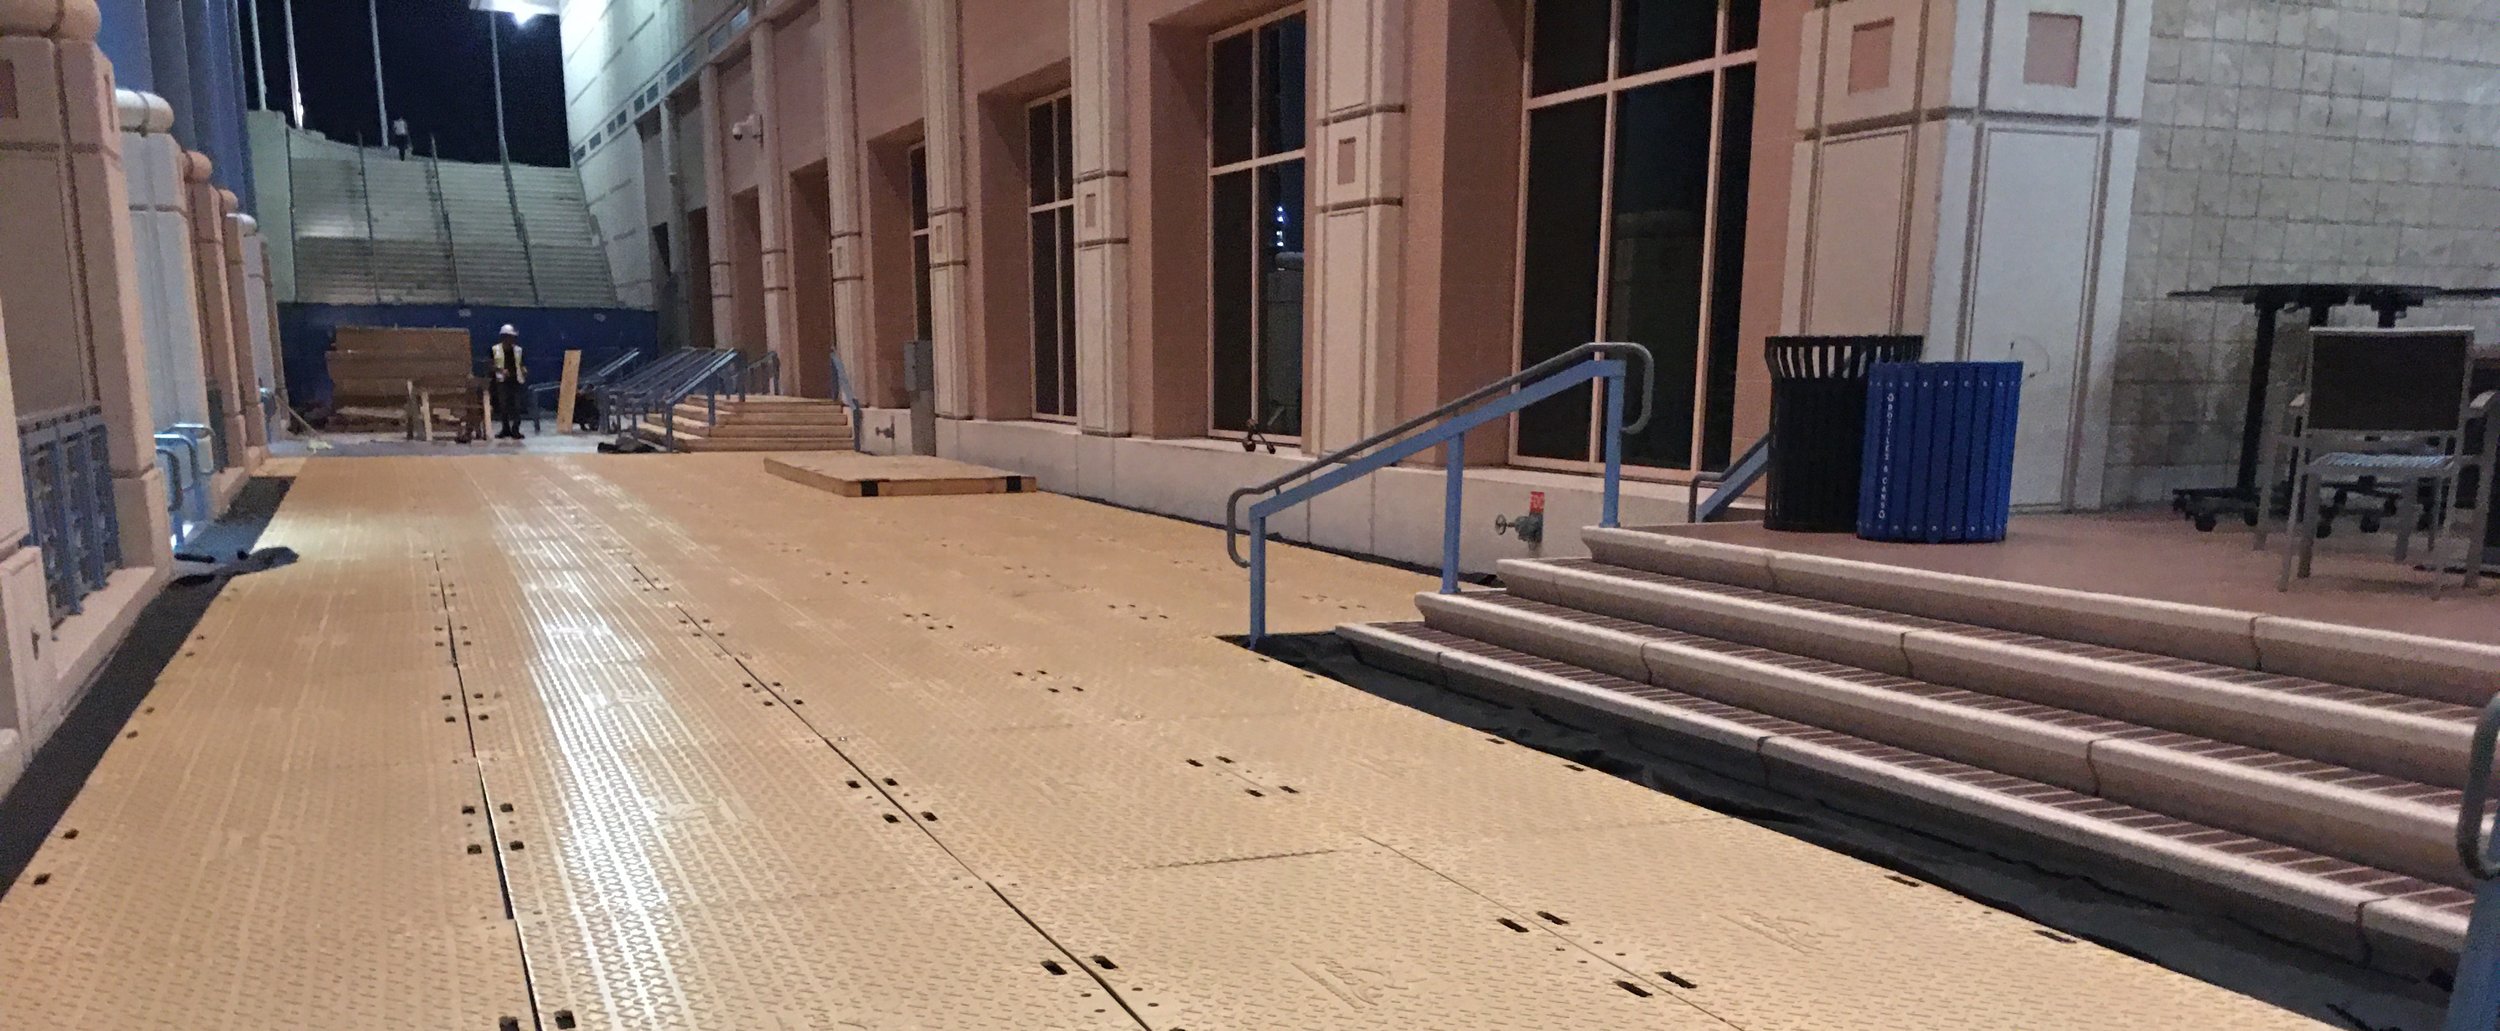 Ground-Protection-Mats-Downtown-Tampa-River-Walk-FL-Capital-Investment-Project.jpg